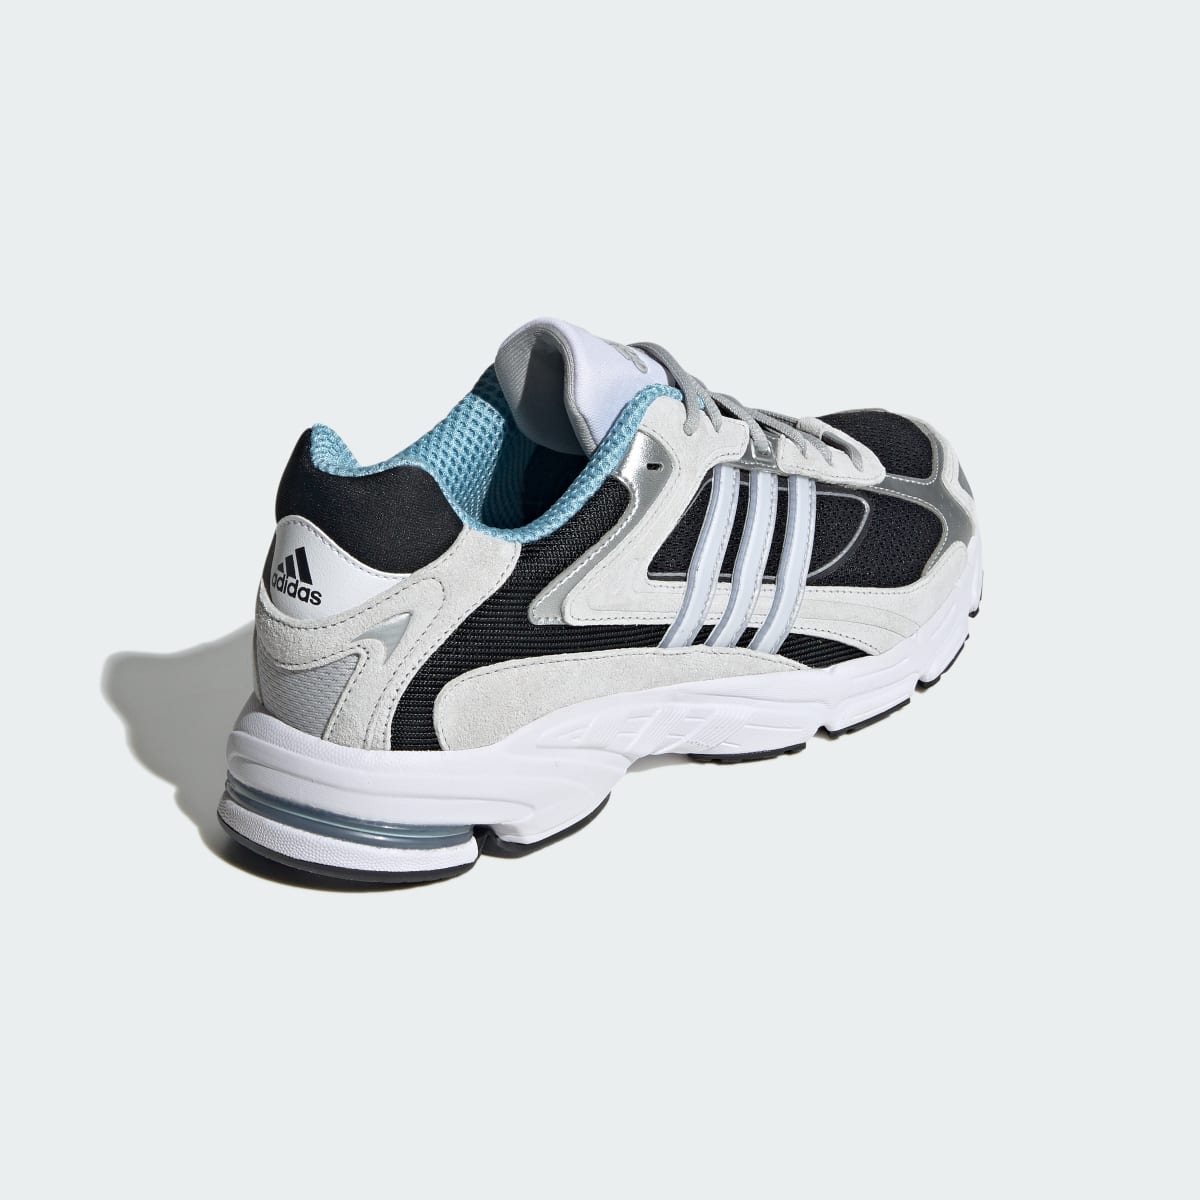 Adidas Response CL Shoes. 6